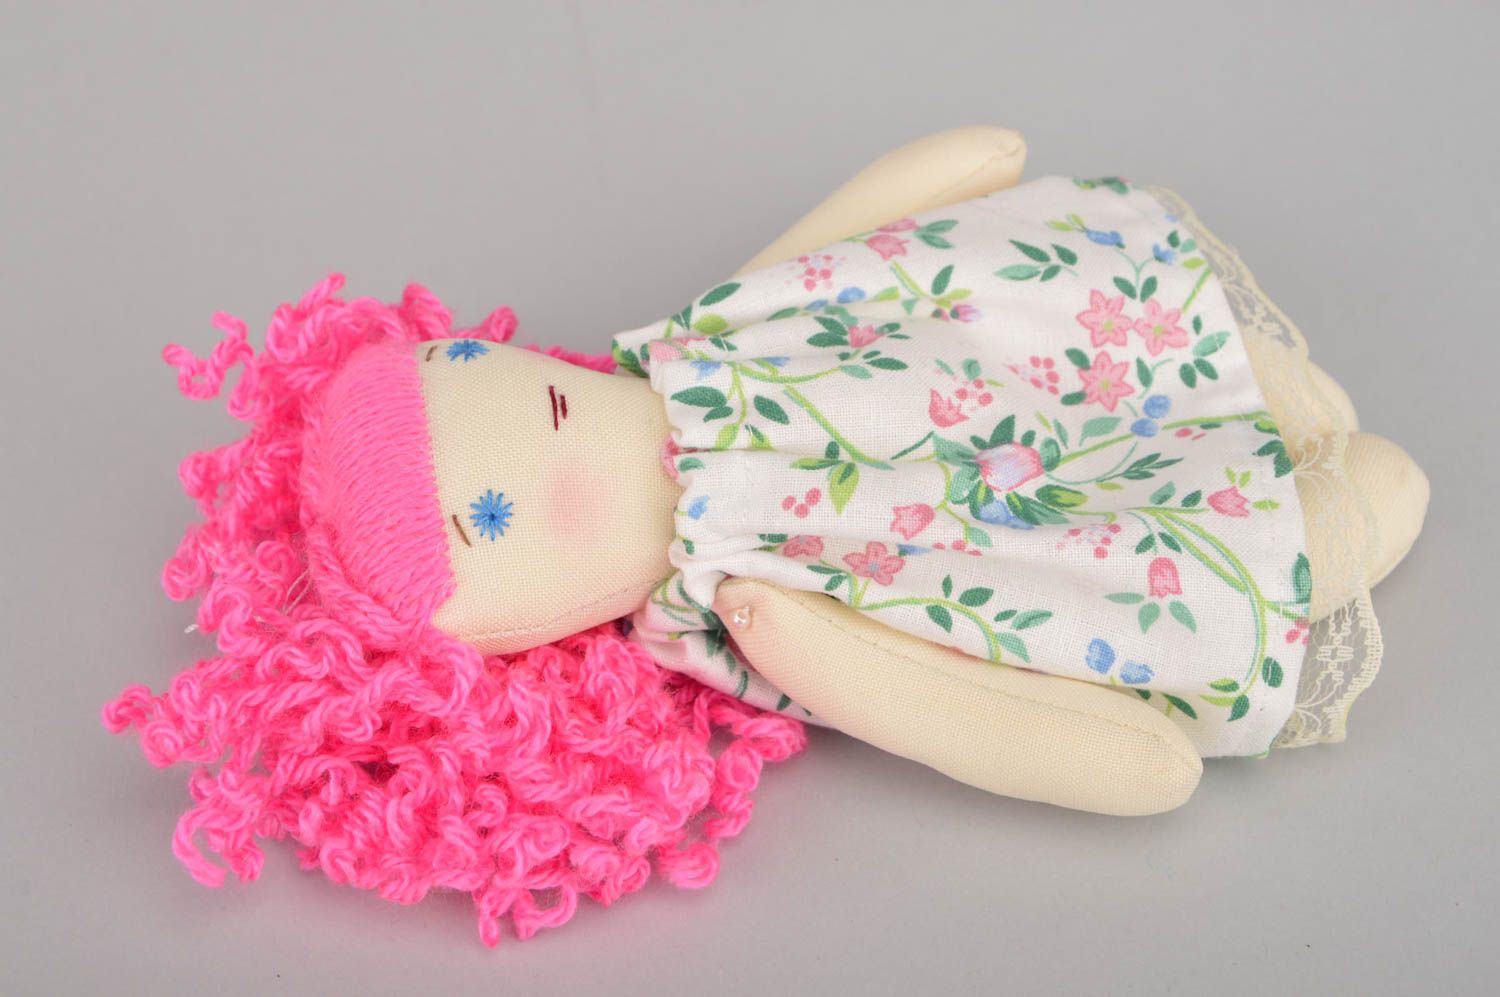 Childrens handmade rag doll fabric soft toy unusual stuffed toy gifts for kids photo 5